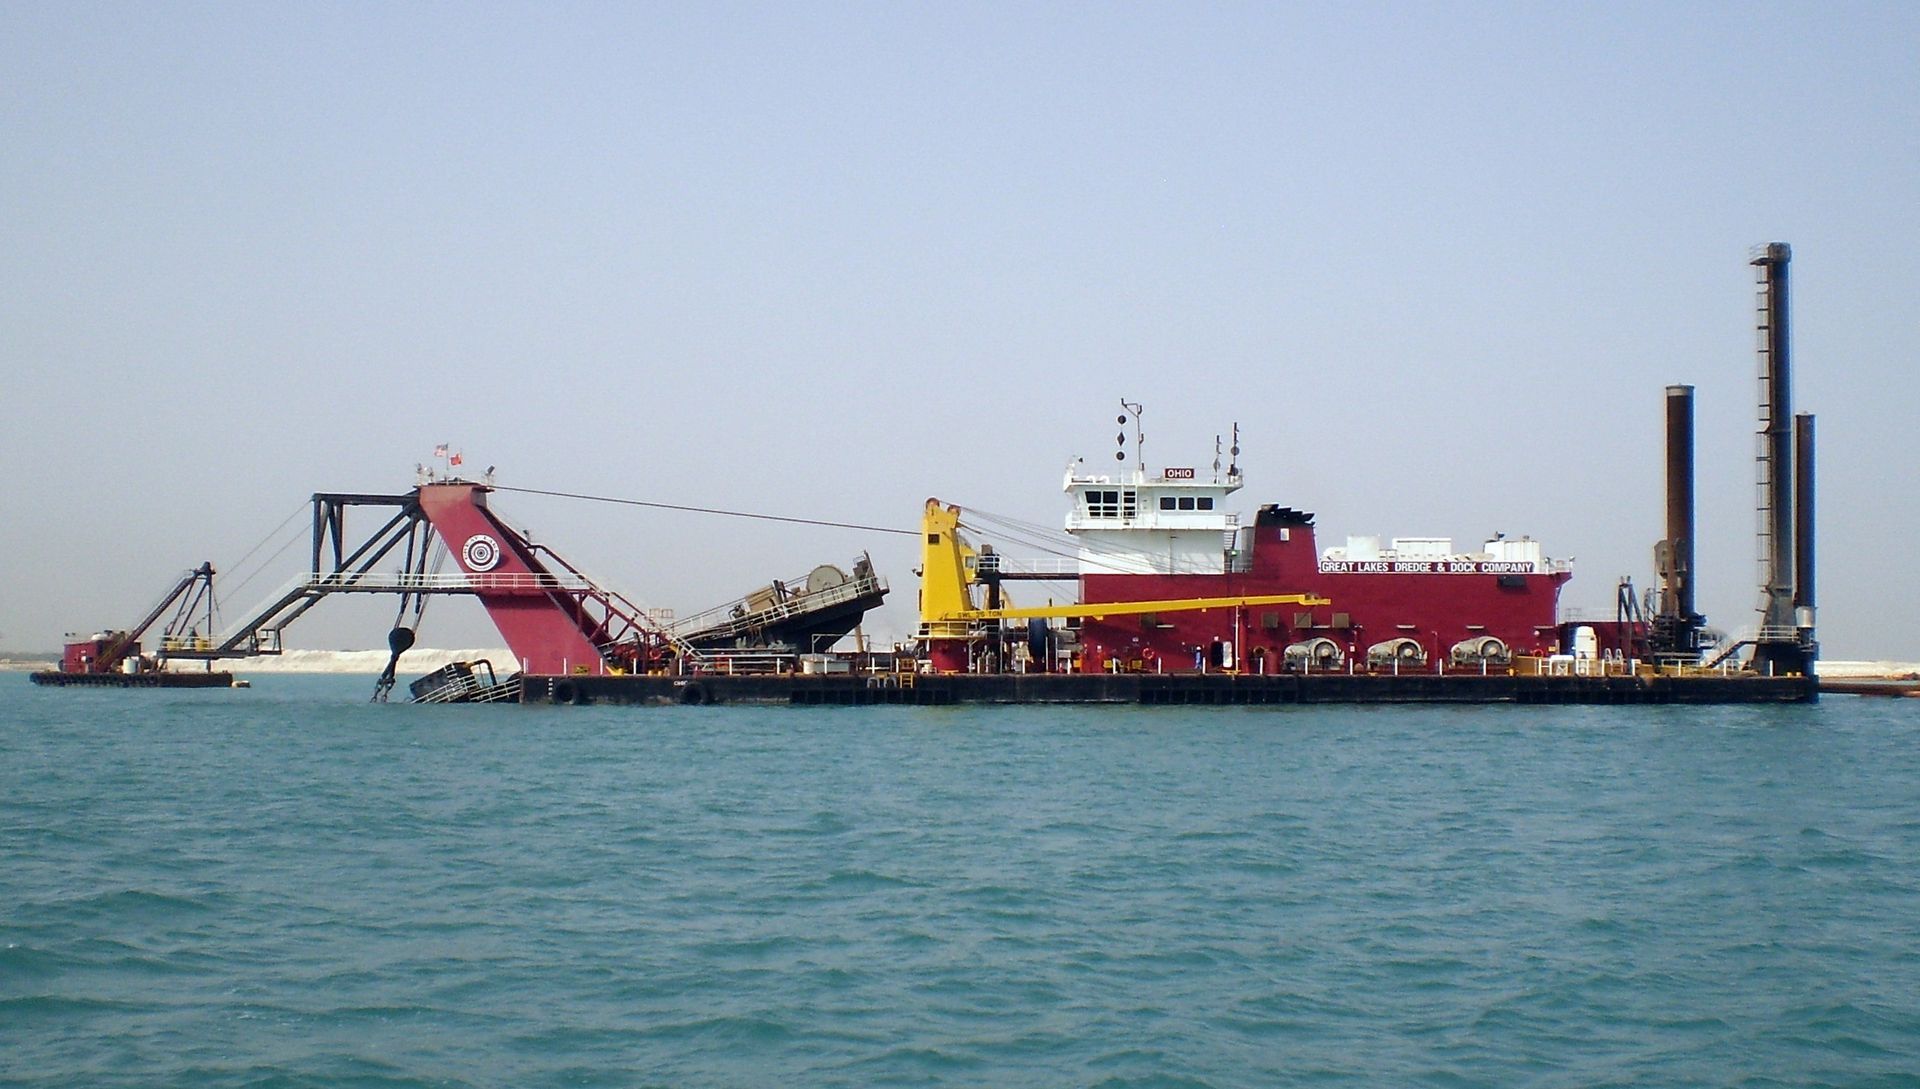 great lakes dredge and dock co.